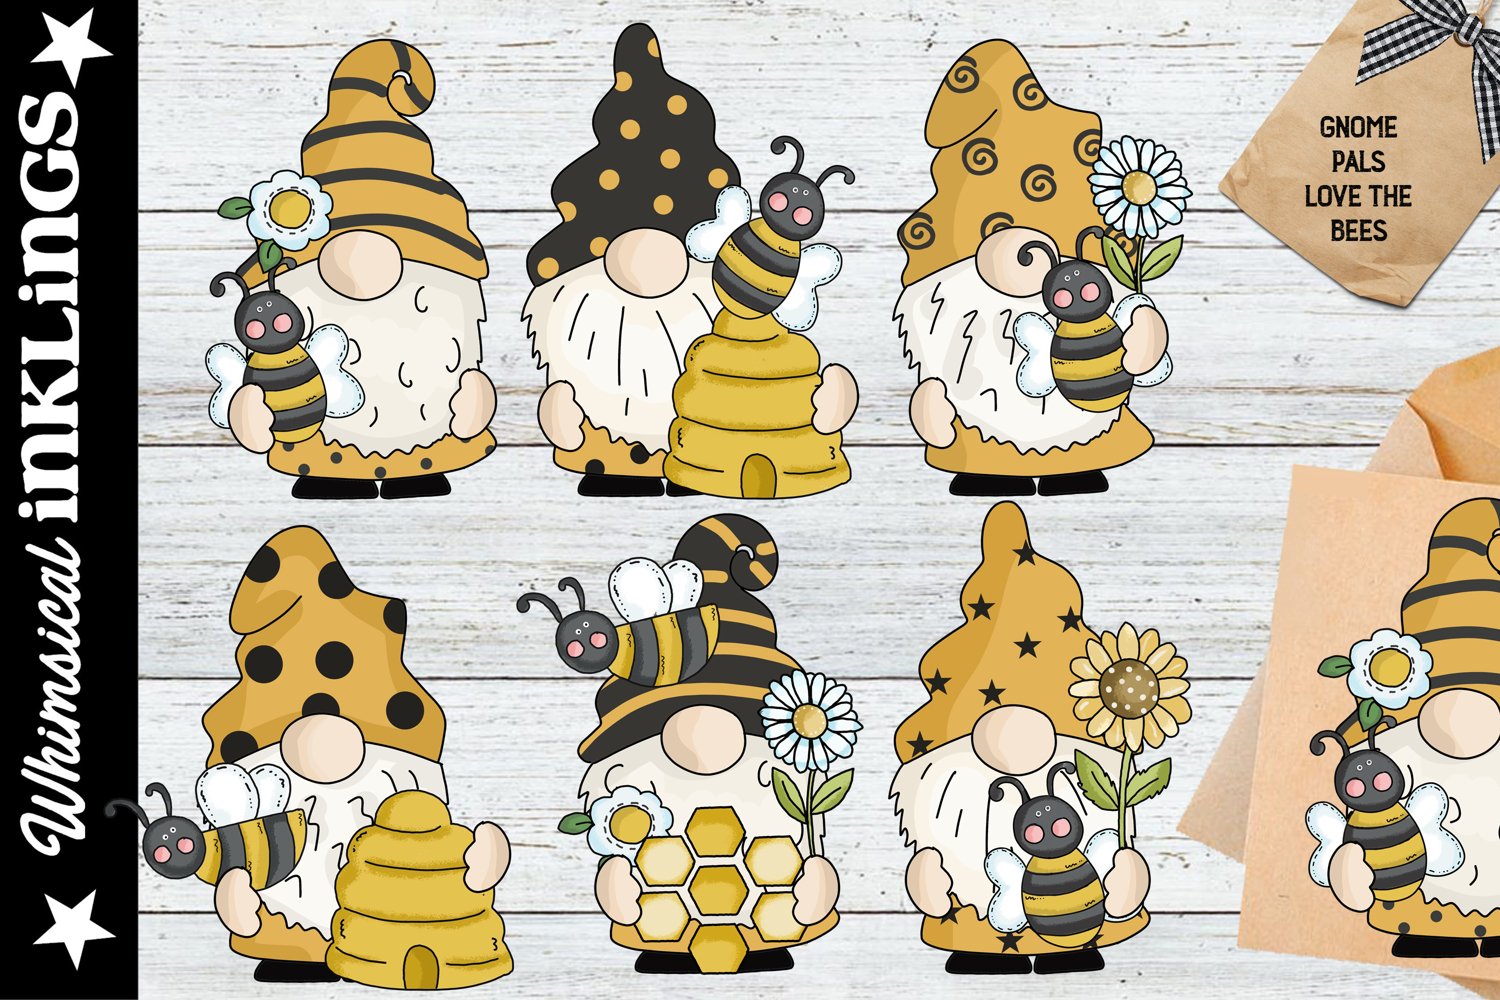 Gnome pals with cute bees.